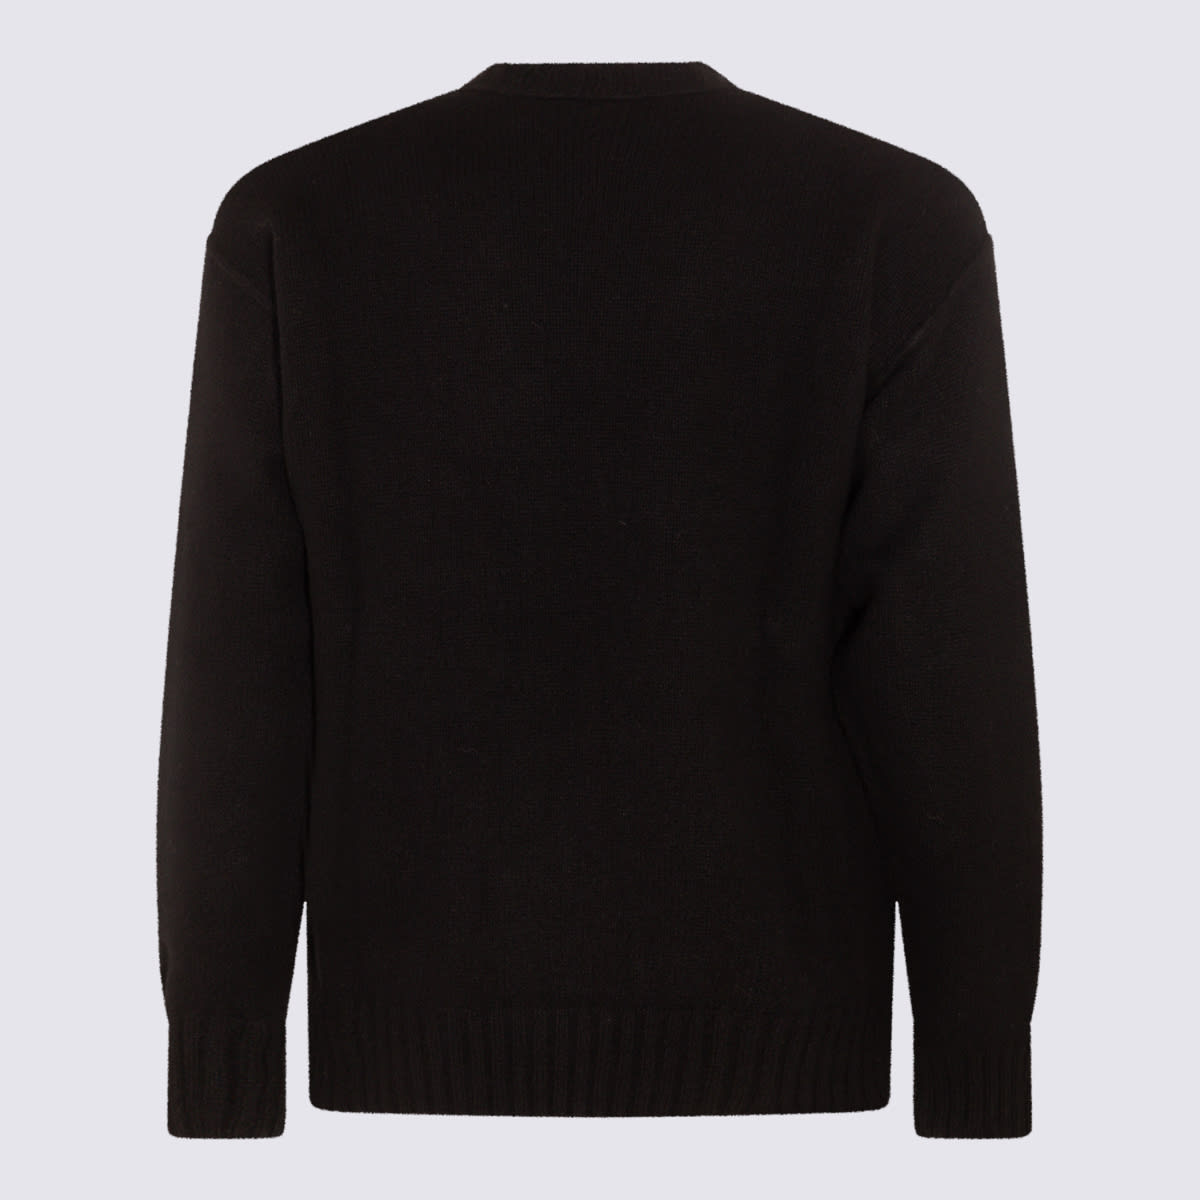 Shop Isabel Benenato Black Cashmere And Wool Blend Sweater